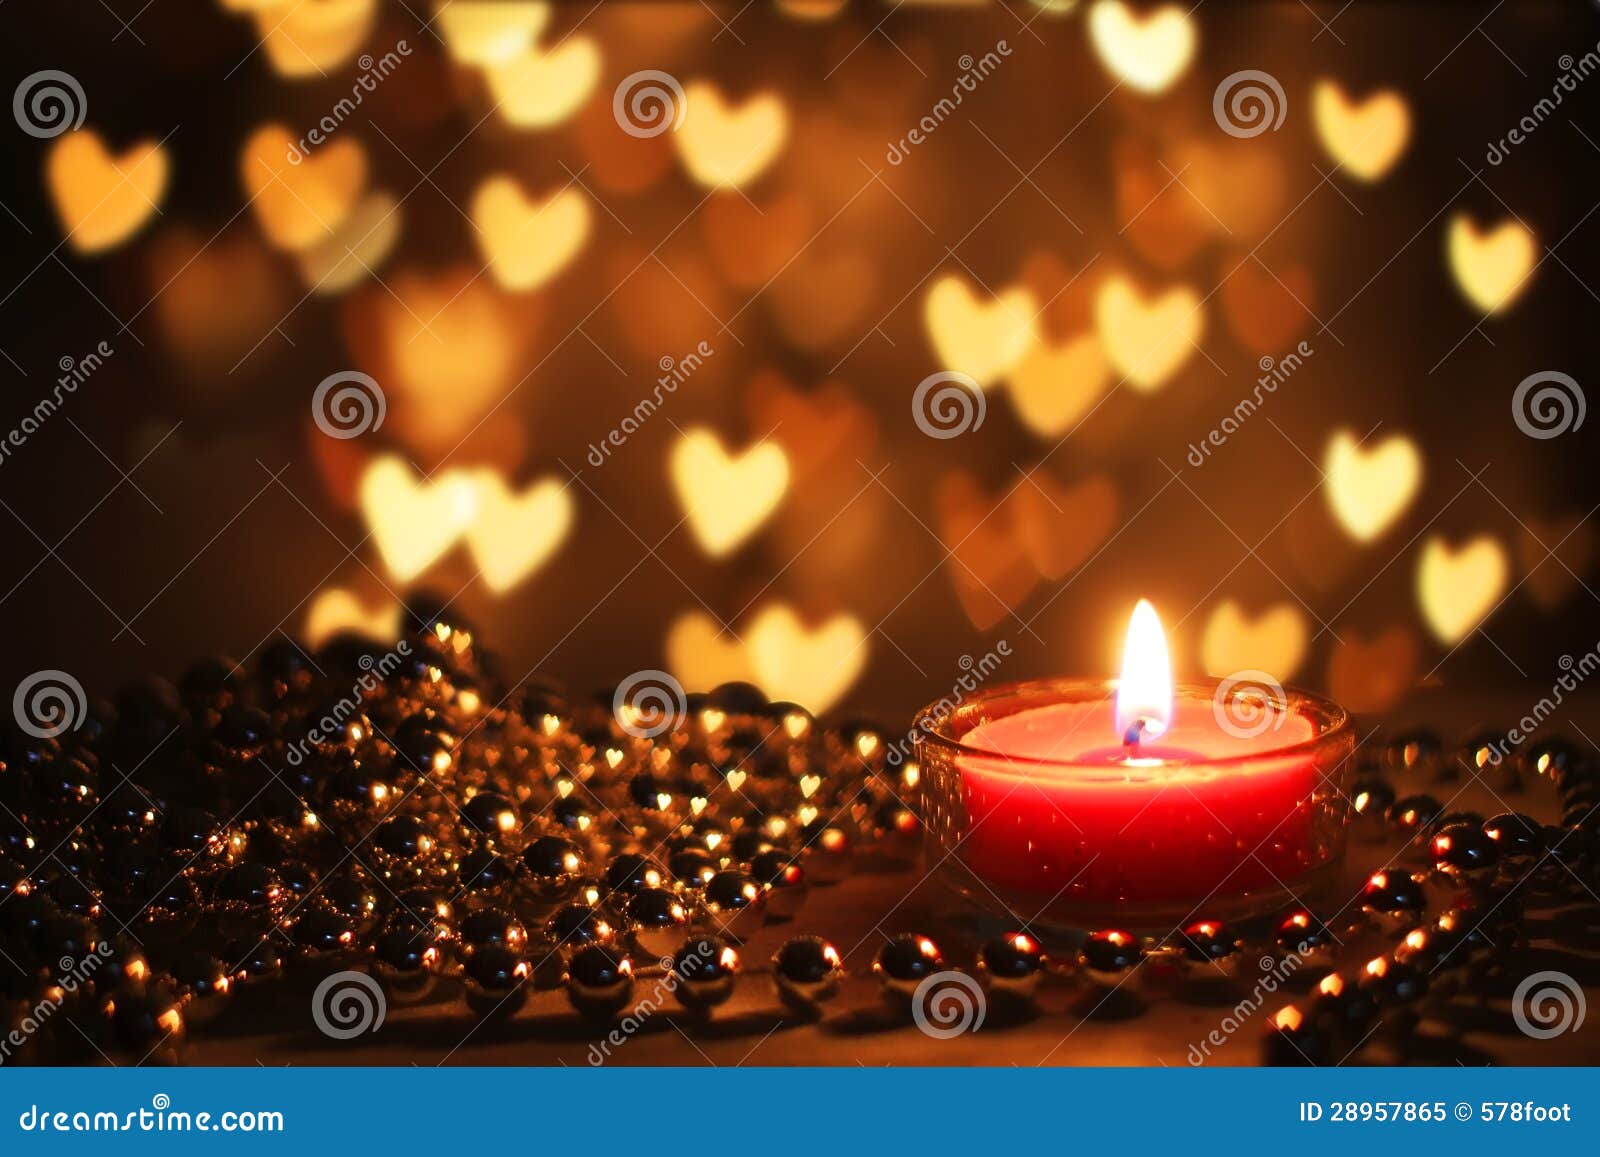 Heart Candles Sign Love Romantic Evening Stock Photo by ©YAYImages 258676766